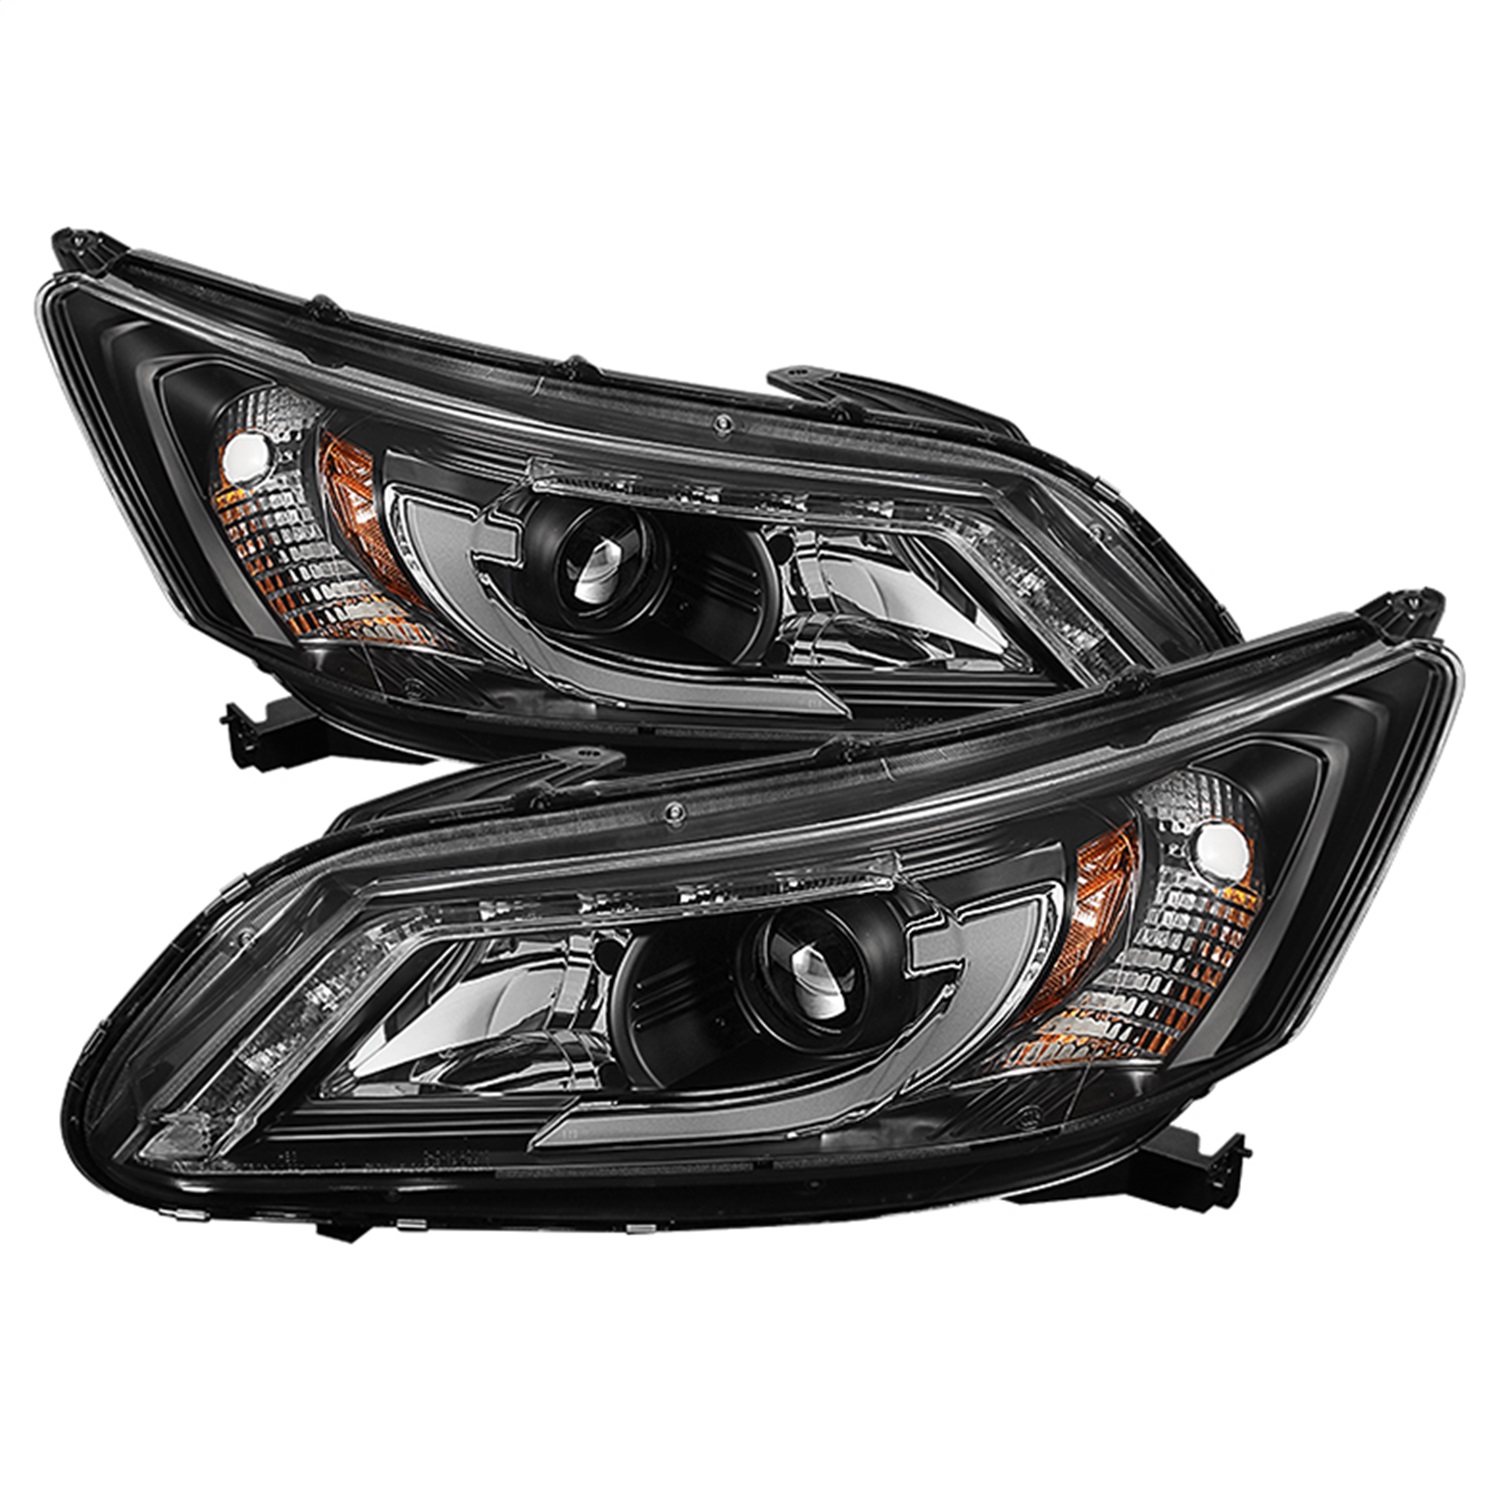 Spyder Auto 5080530 DRL Projector Headlights Fits 13-15 Accord